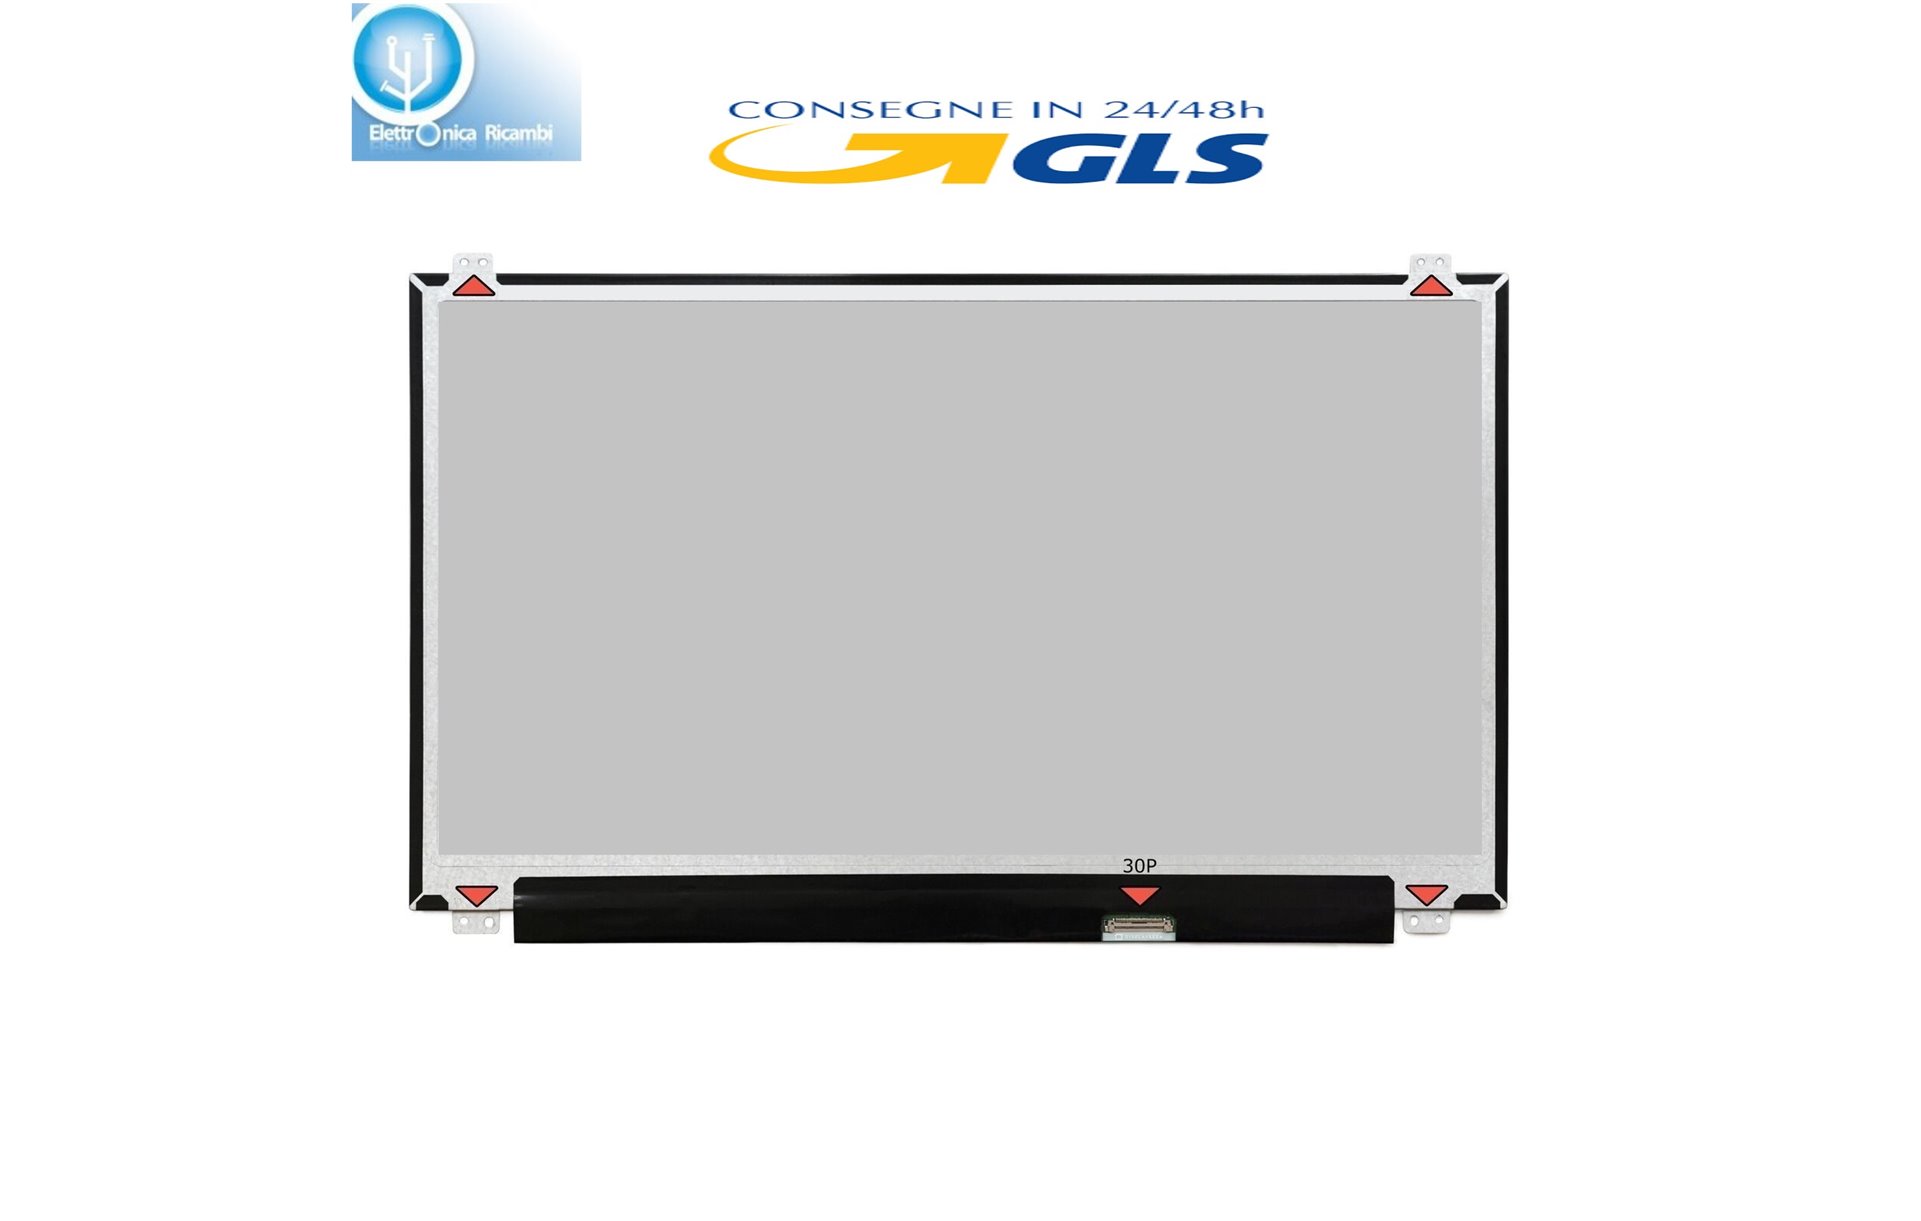 Display LCD Schermo 15,6 LED ES1-531 connettore 30 pin